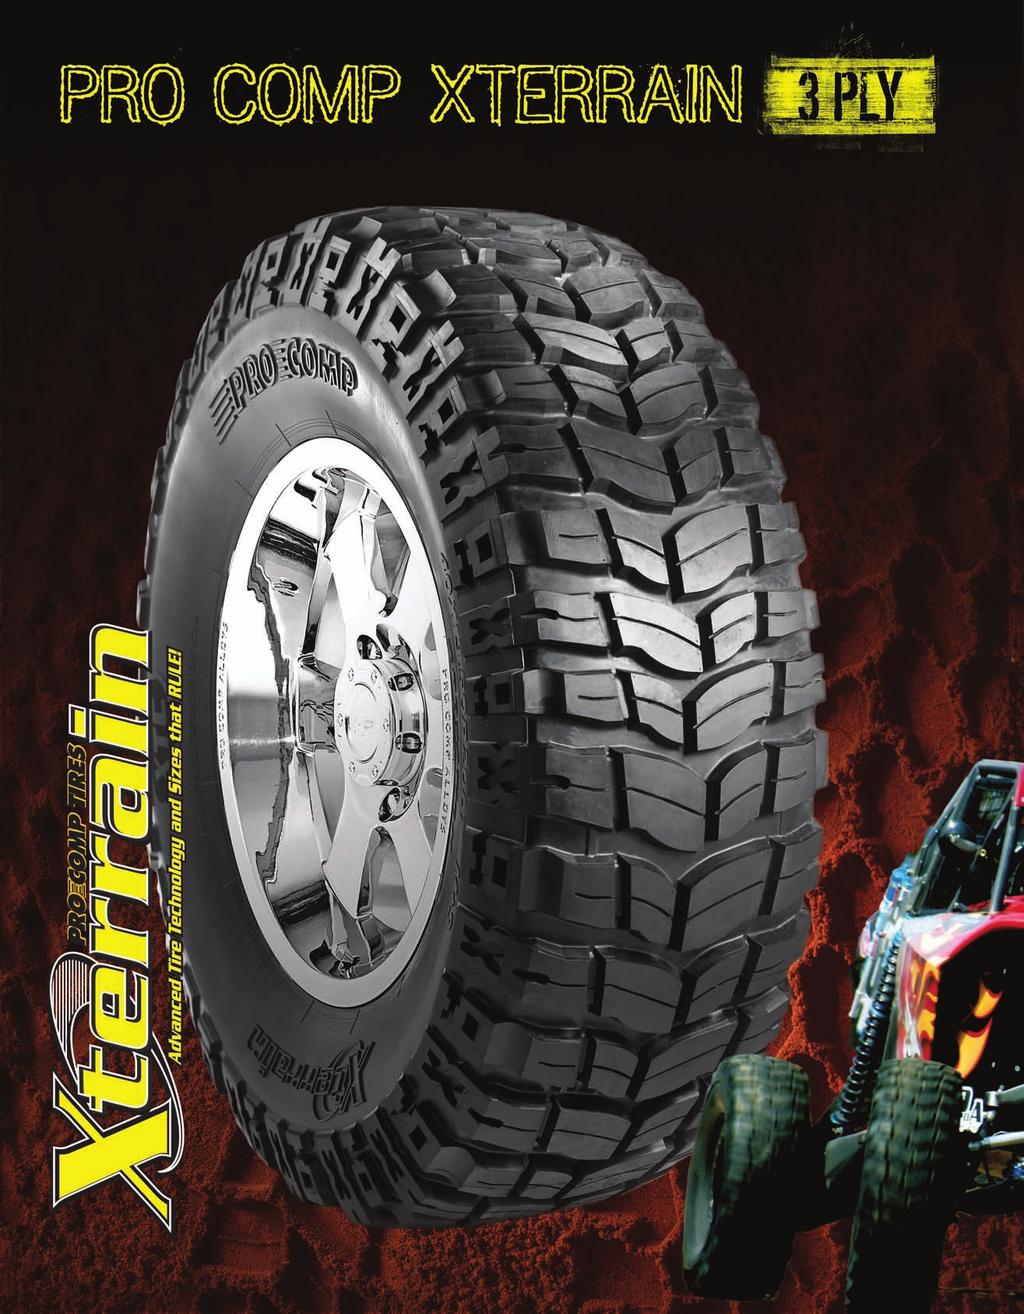 The 3-PLY Xterrain incorporates TRI-PLY construction and XTC tread compound. This Awesome Monster is load rated to handle all your hauling needs.